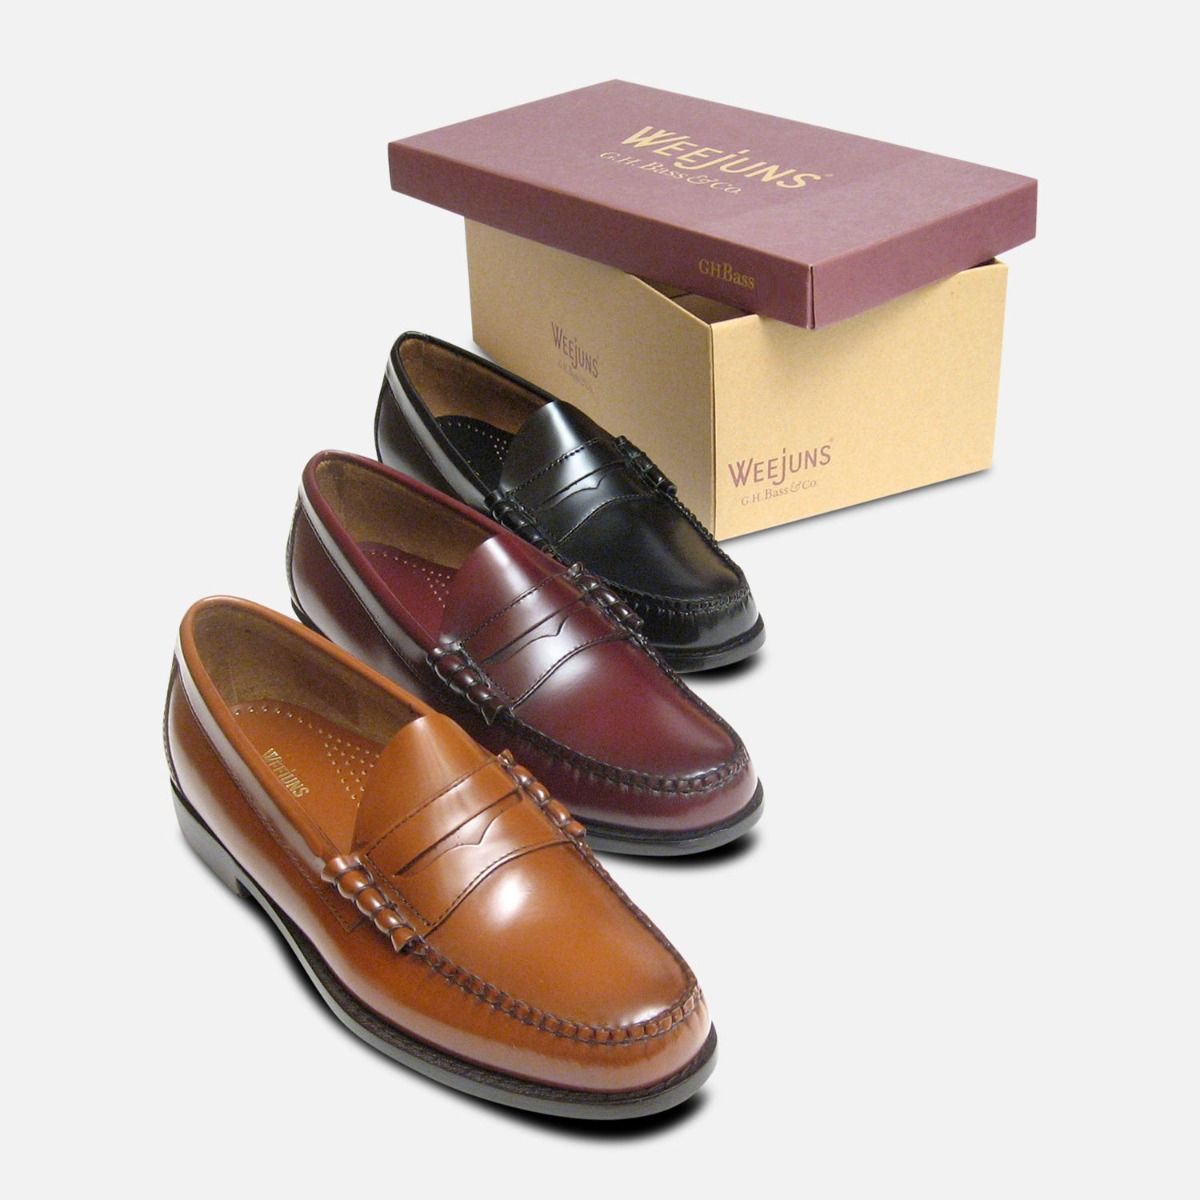 gh bass loafers uk